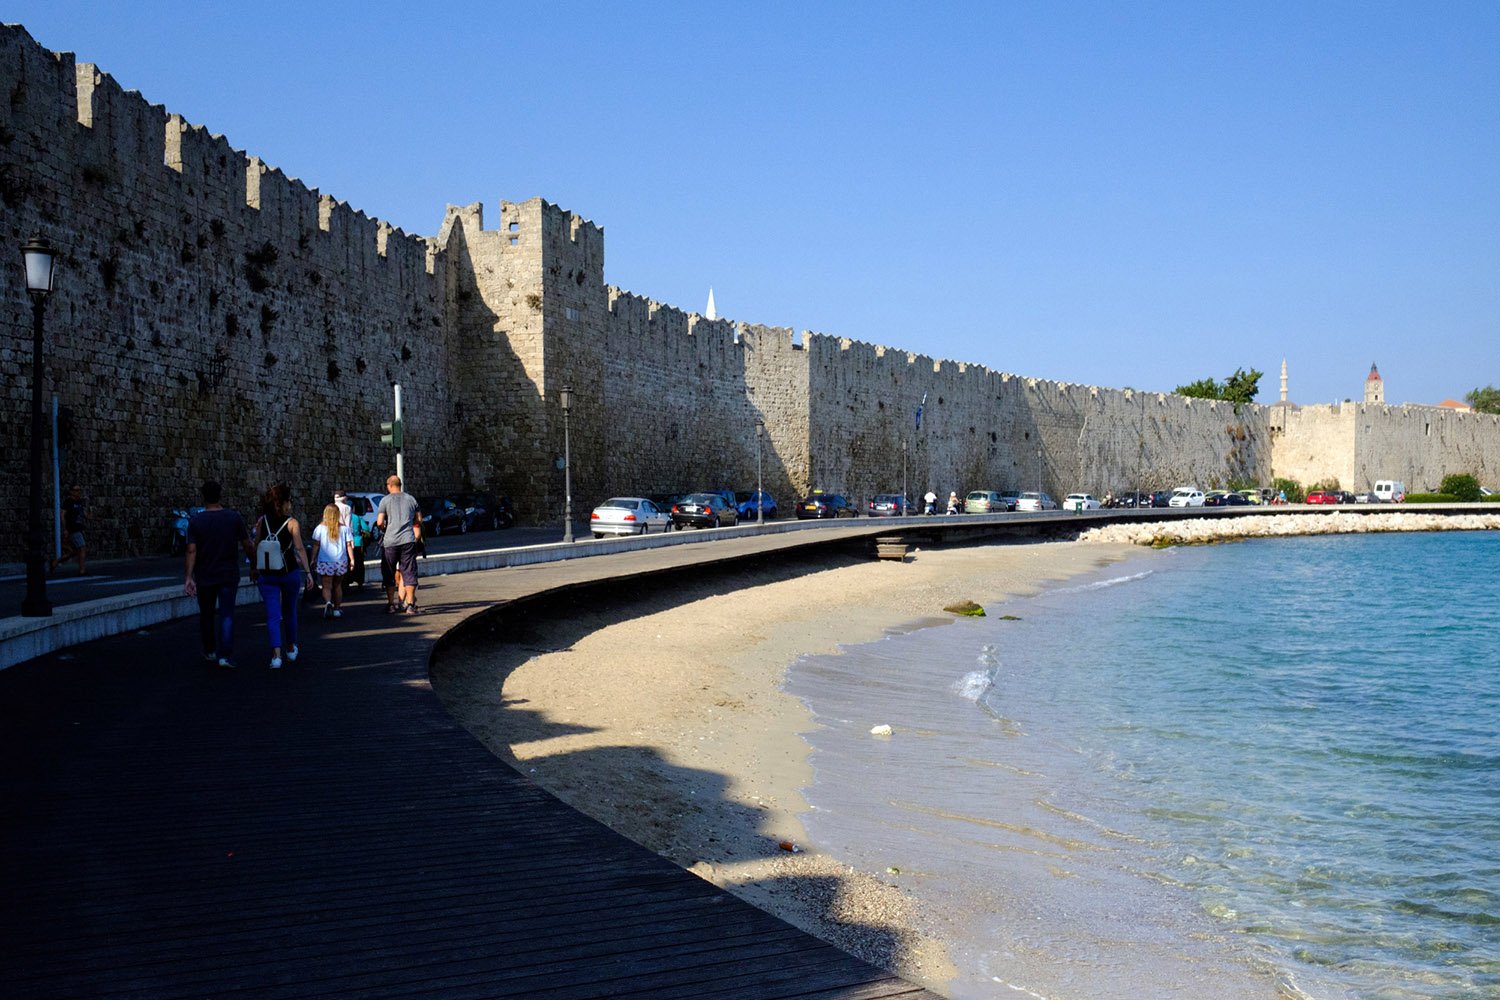 The walled city of Rhodes